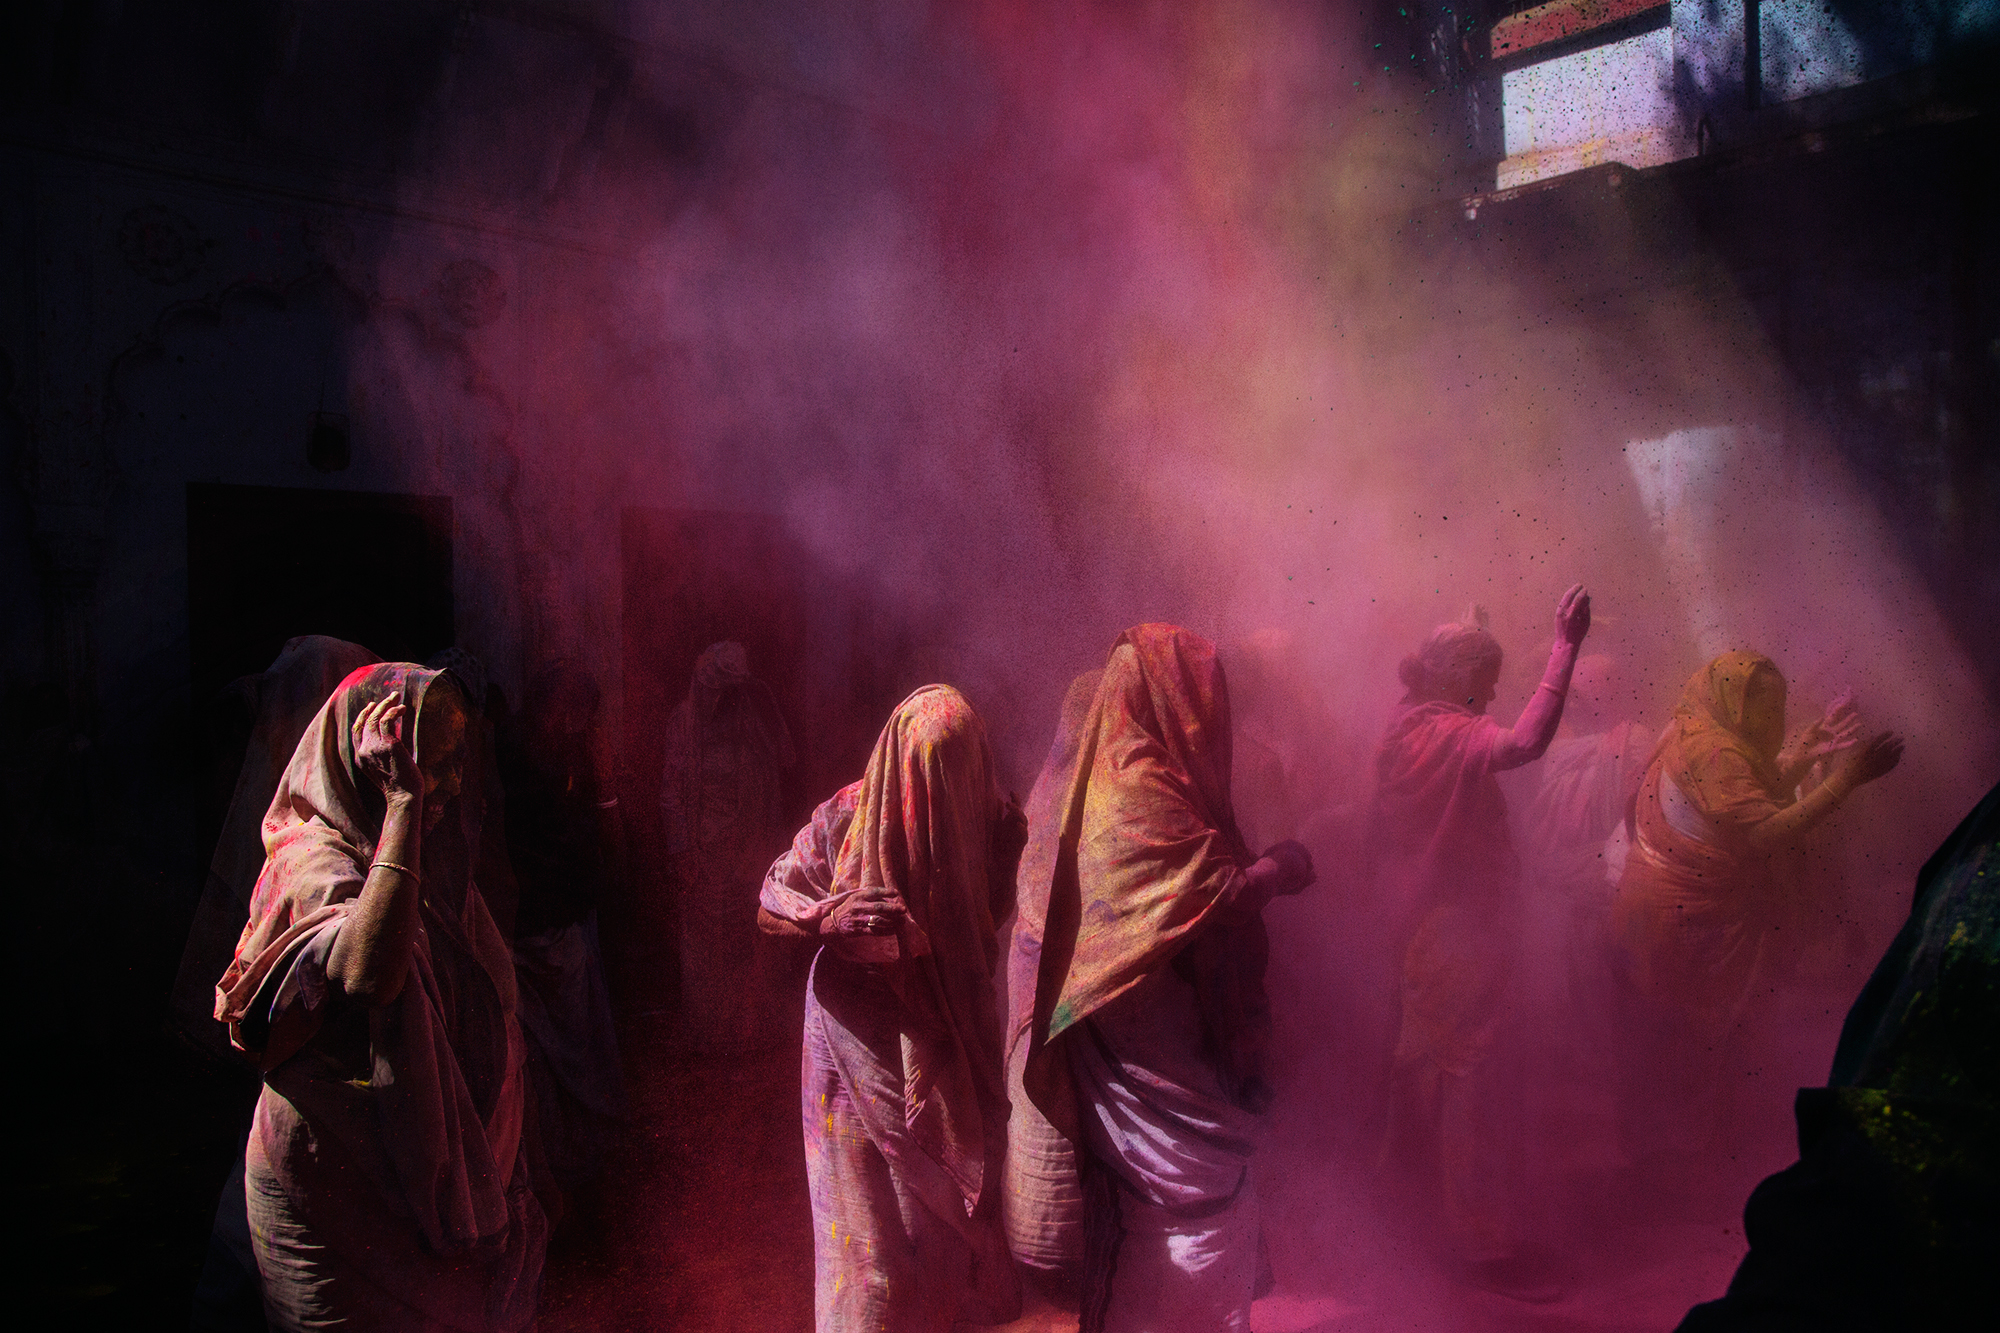  Widows from the Meera Sahabhhagini Ashram celebrate the Holi Festival in Vrindavan, Uttar Pradesh, India. Over the past years they have been encouraged to engage in celebrations by social organisations that are attempting to raise their status in co